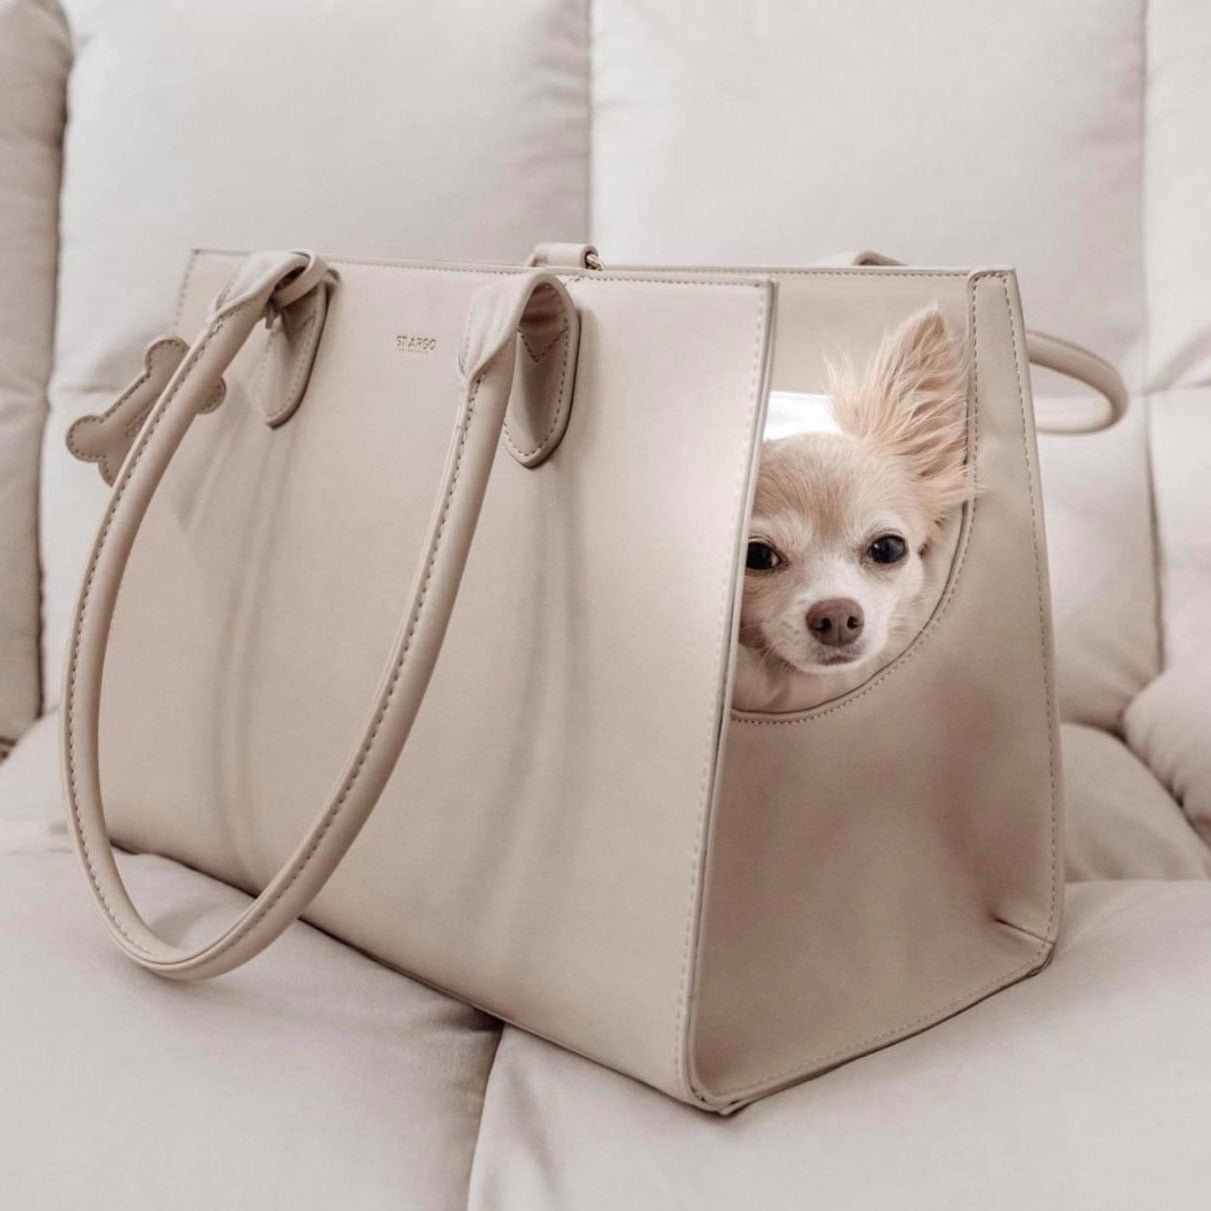 Beige LOLA dog carrier in vegan leather. With a chihuahua